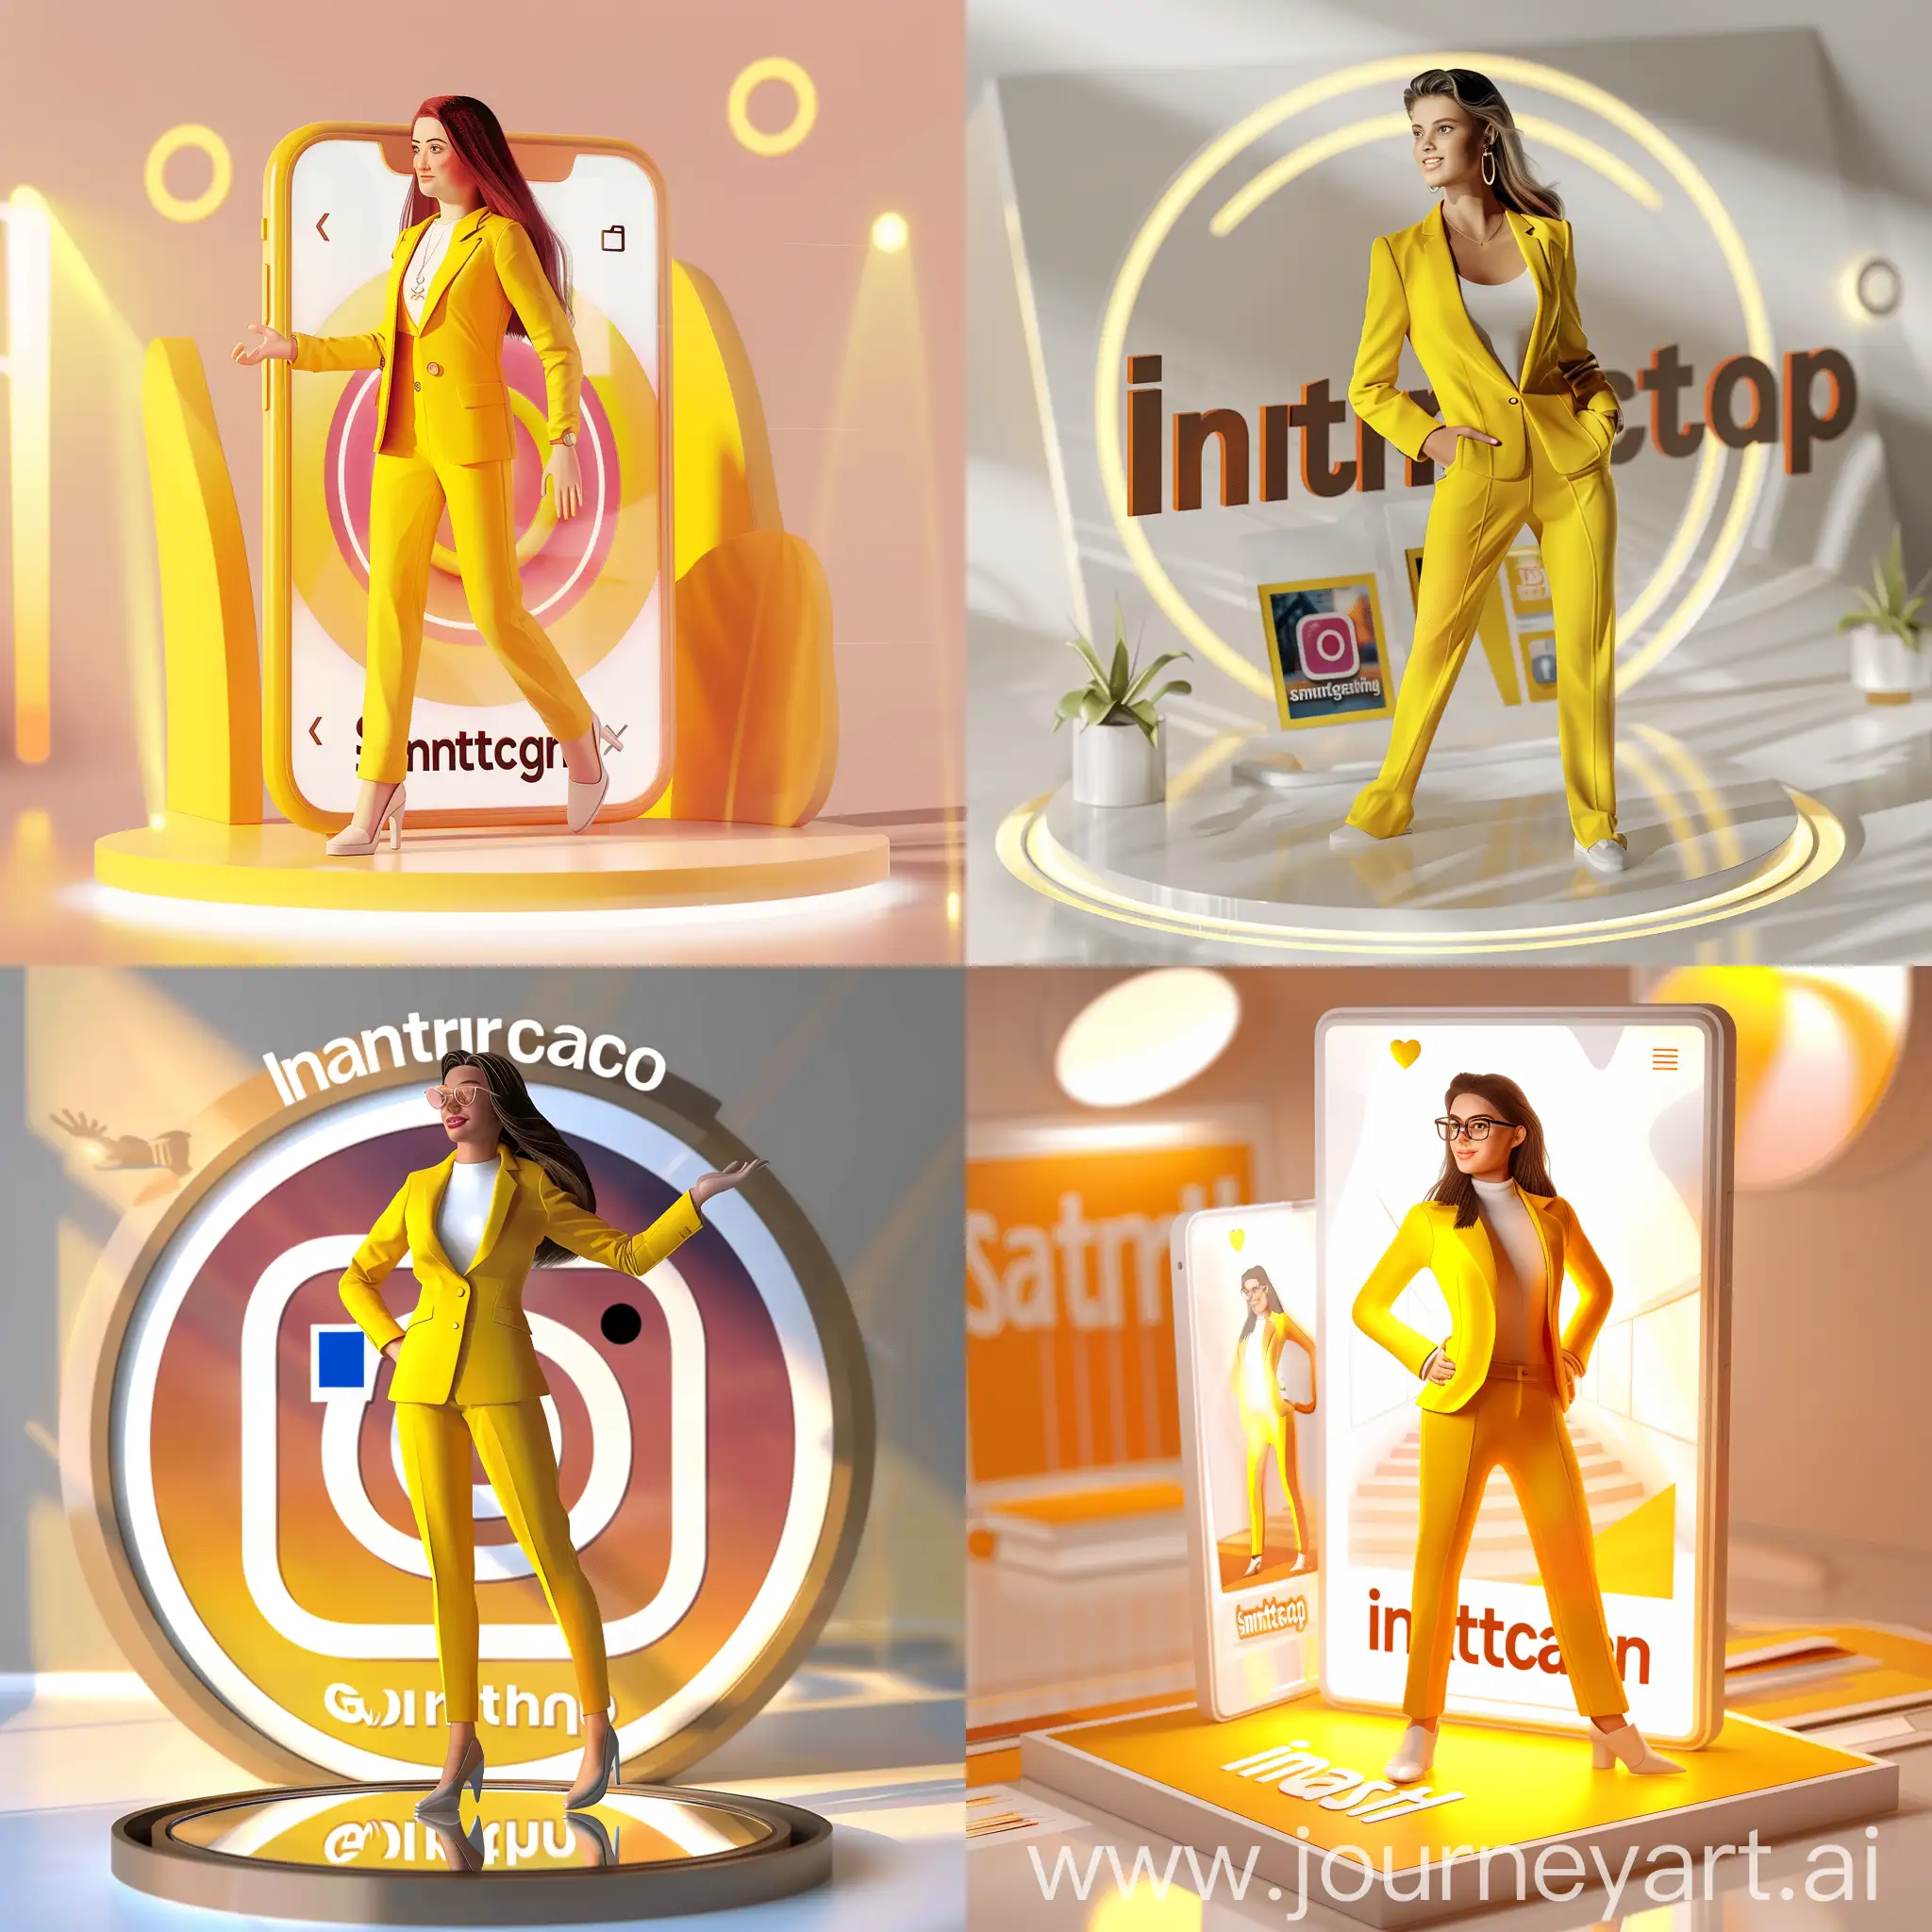 handsome girl setting on a social media logo "Instagram". wearing yellow suite . The background is mockup of his Instagram profile page with a profile name "Smart Graphics" and a profile picture . soft light reflection